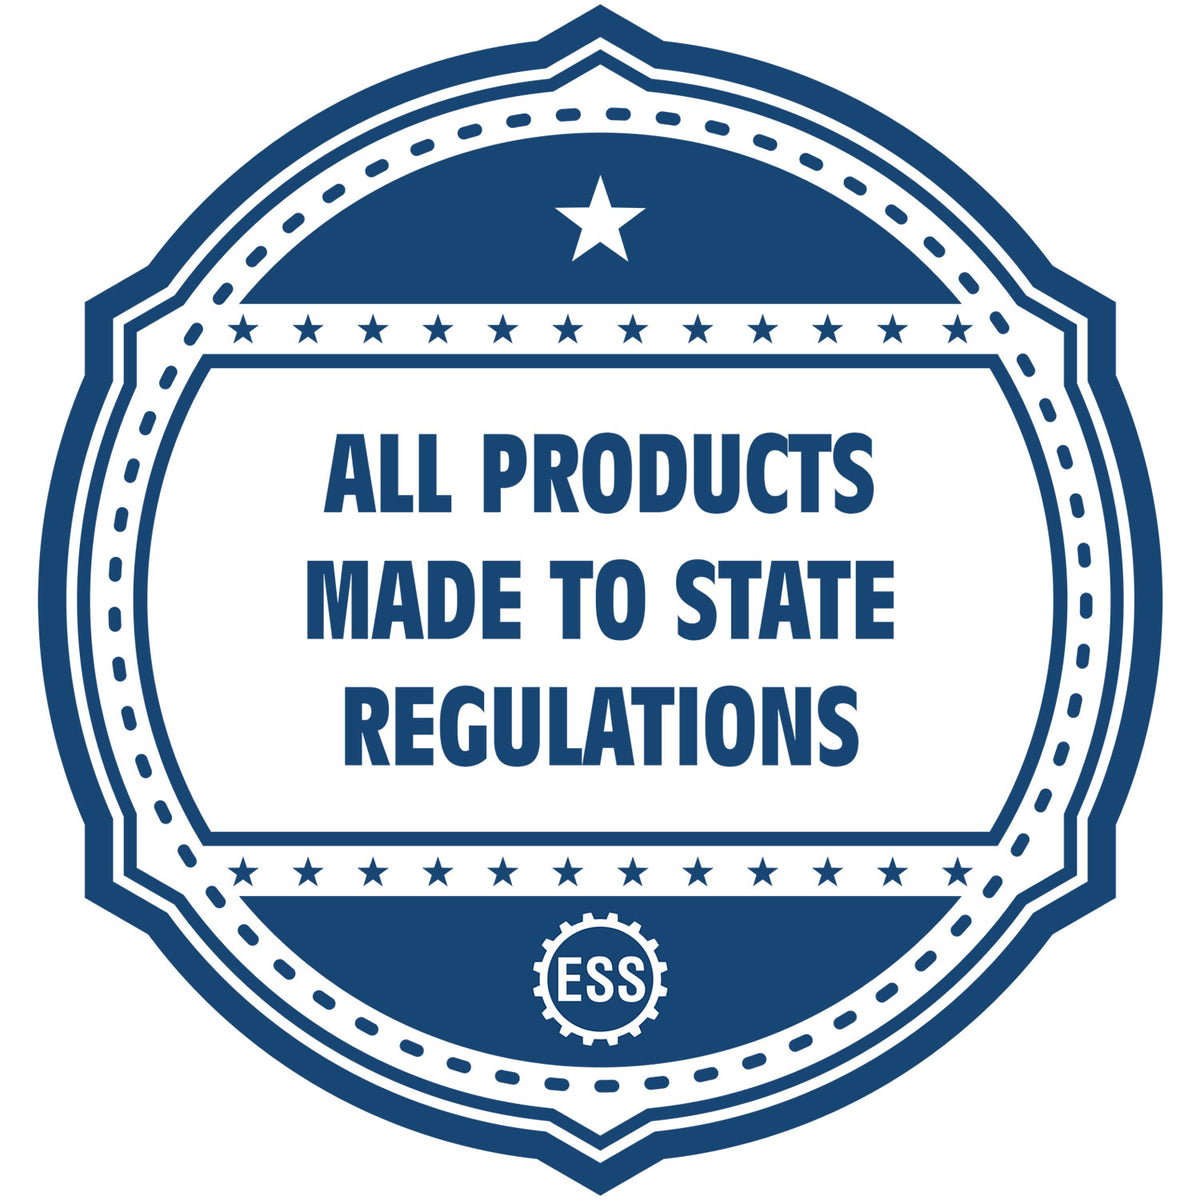 A blue icon or badge for the Kentucky Professional Geologist Seal Stamp showing that this product is made in compliance with state regulations.